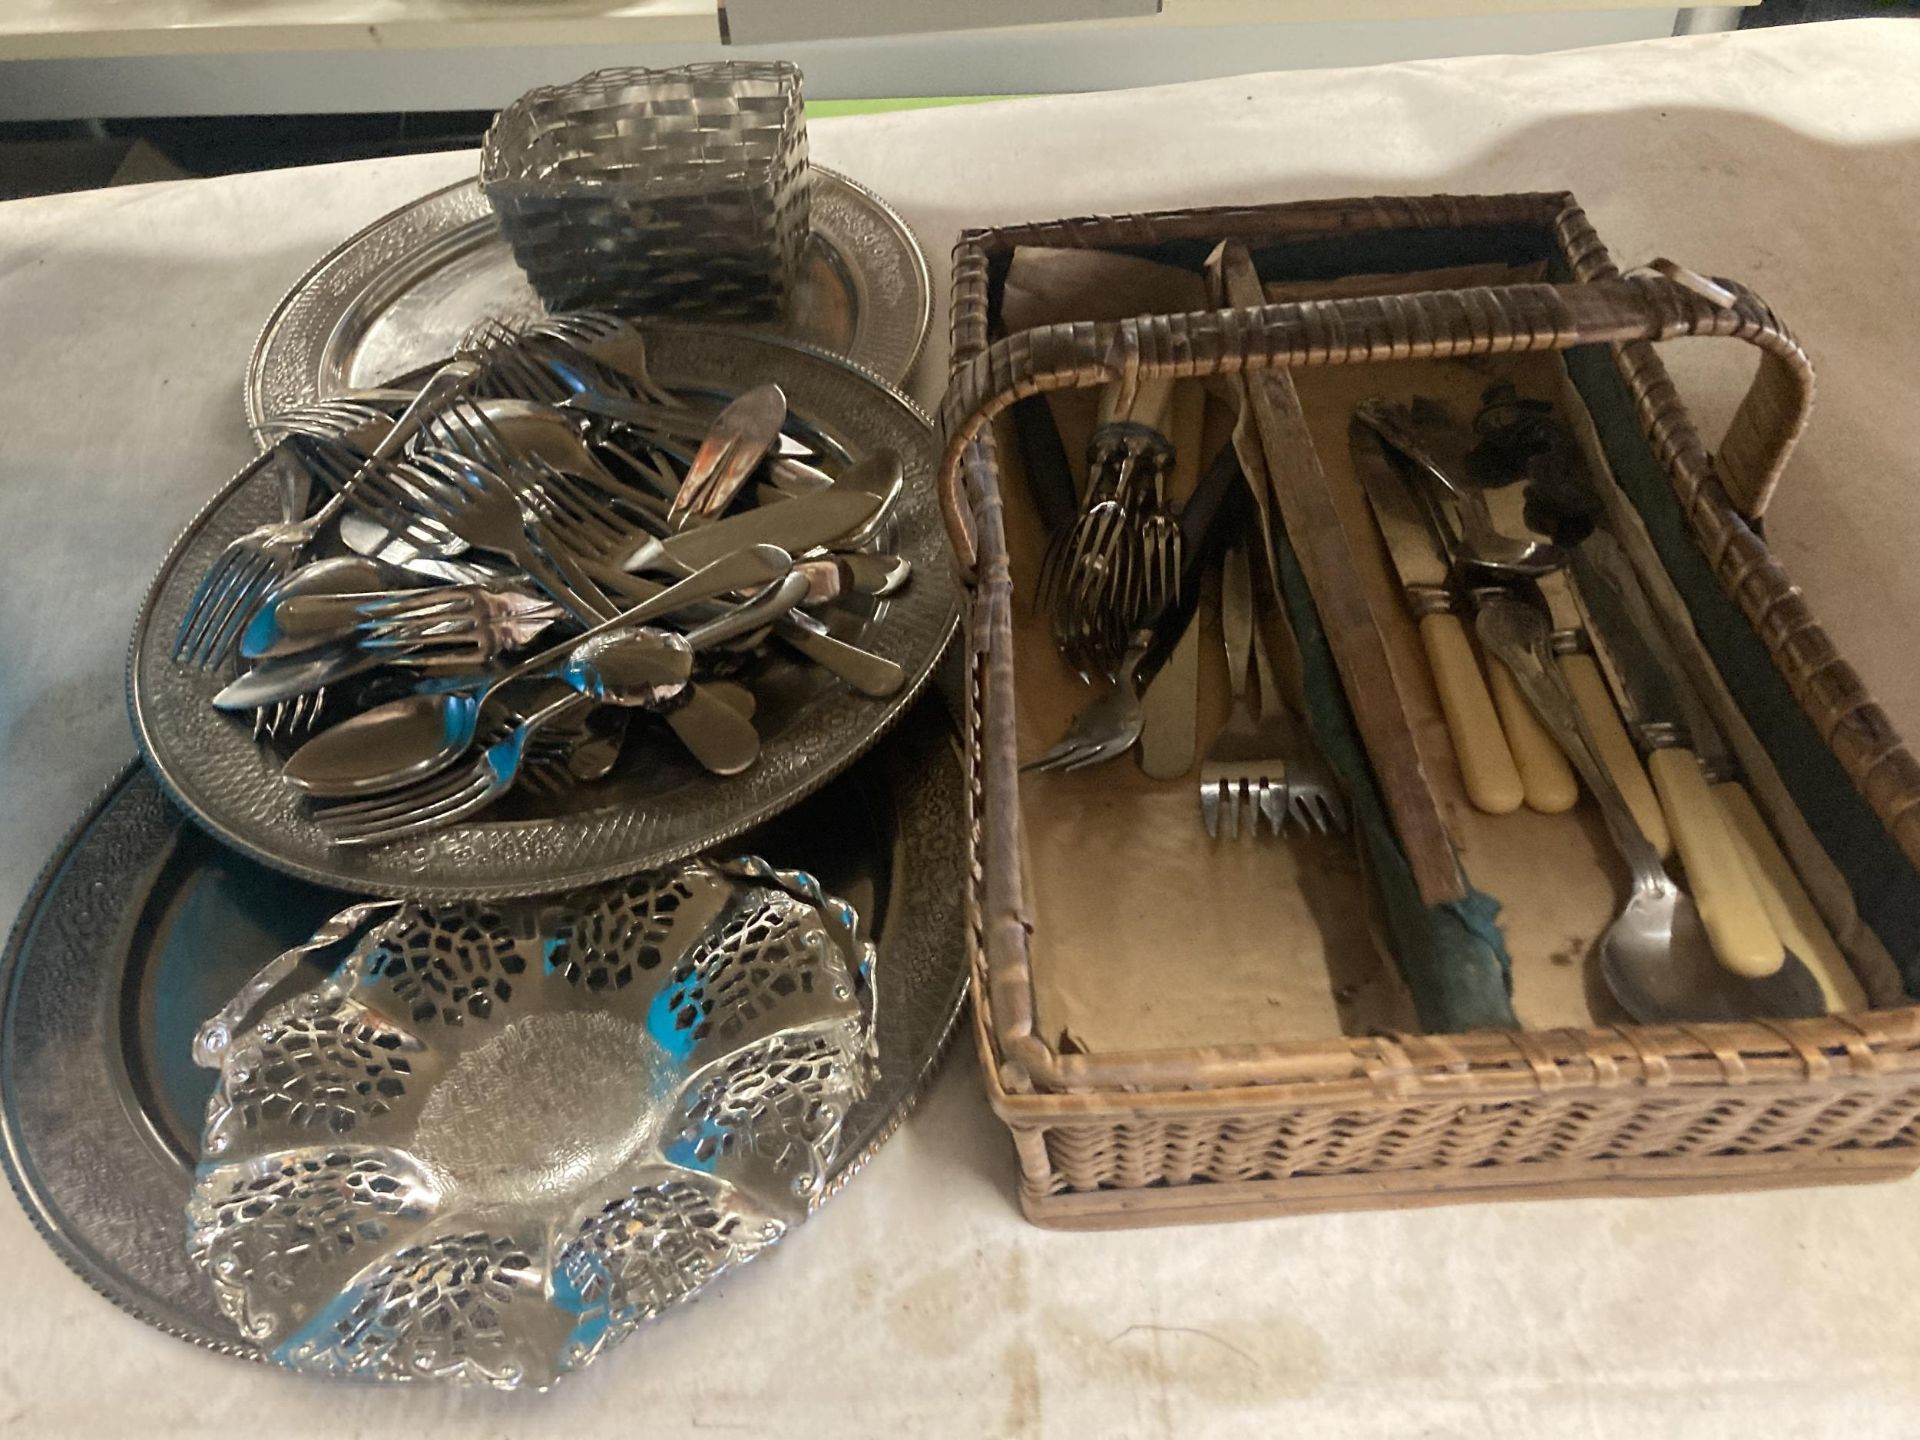 A QUANTITY OF VINTAGE FLATWARE IN A BASKET, PLUS THREE SILVER PLATED TRAYS, ETC